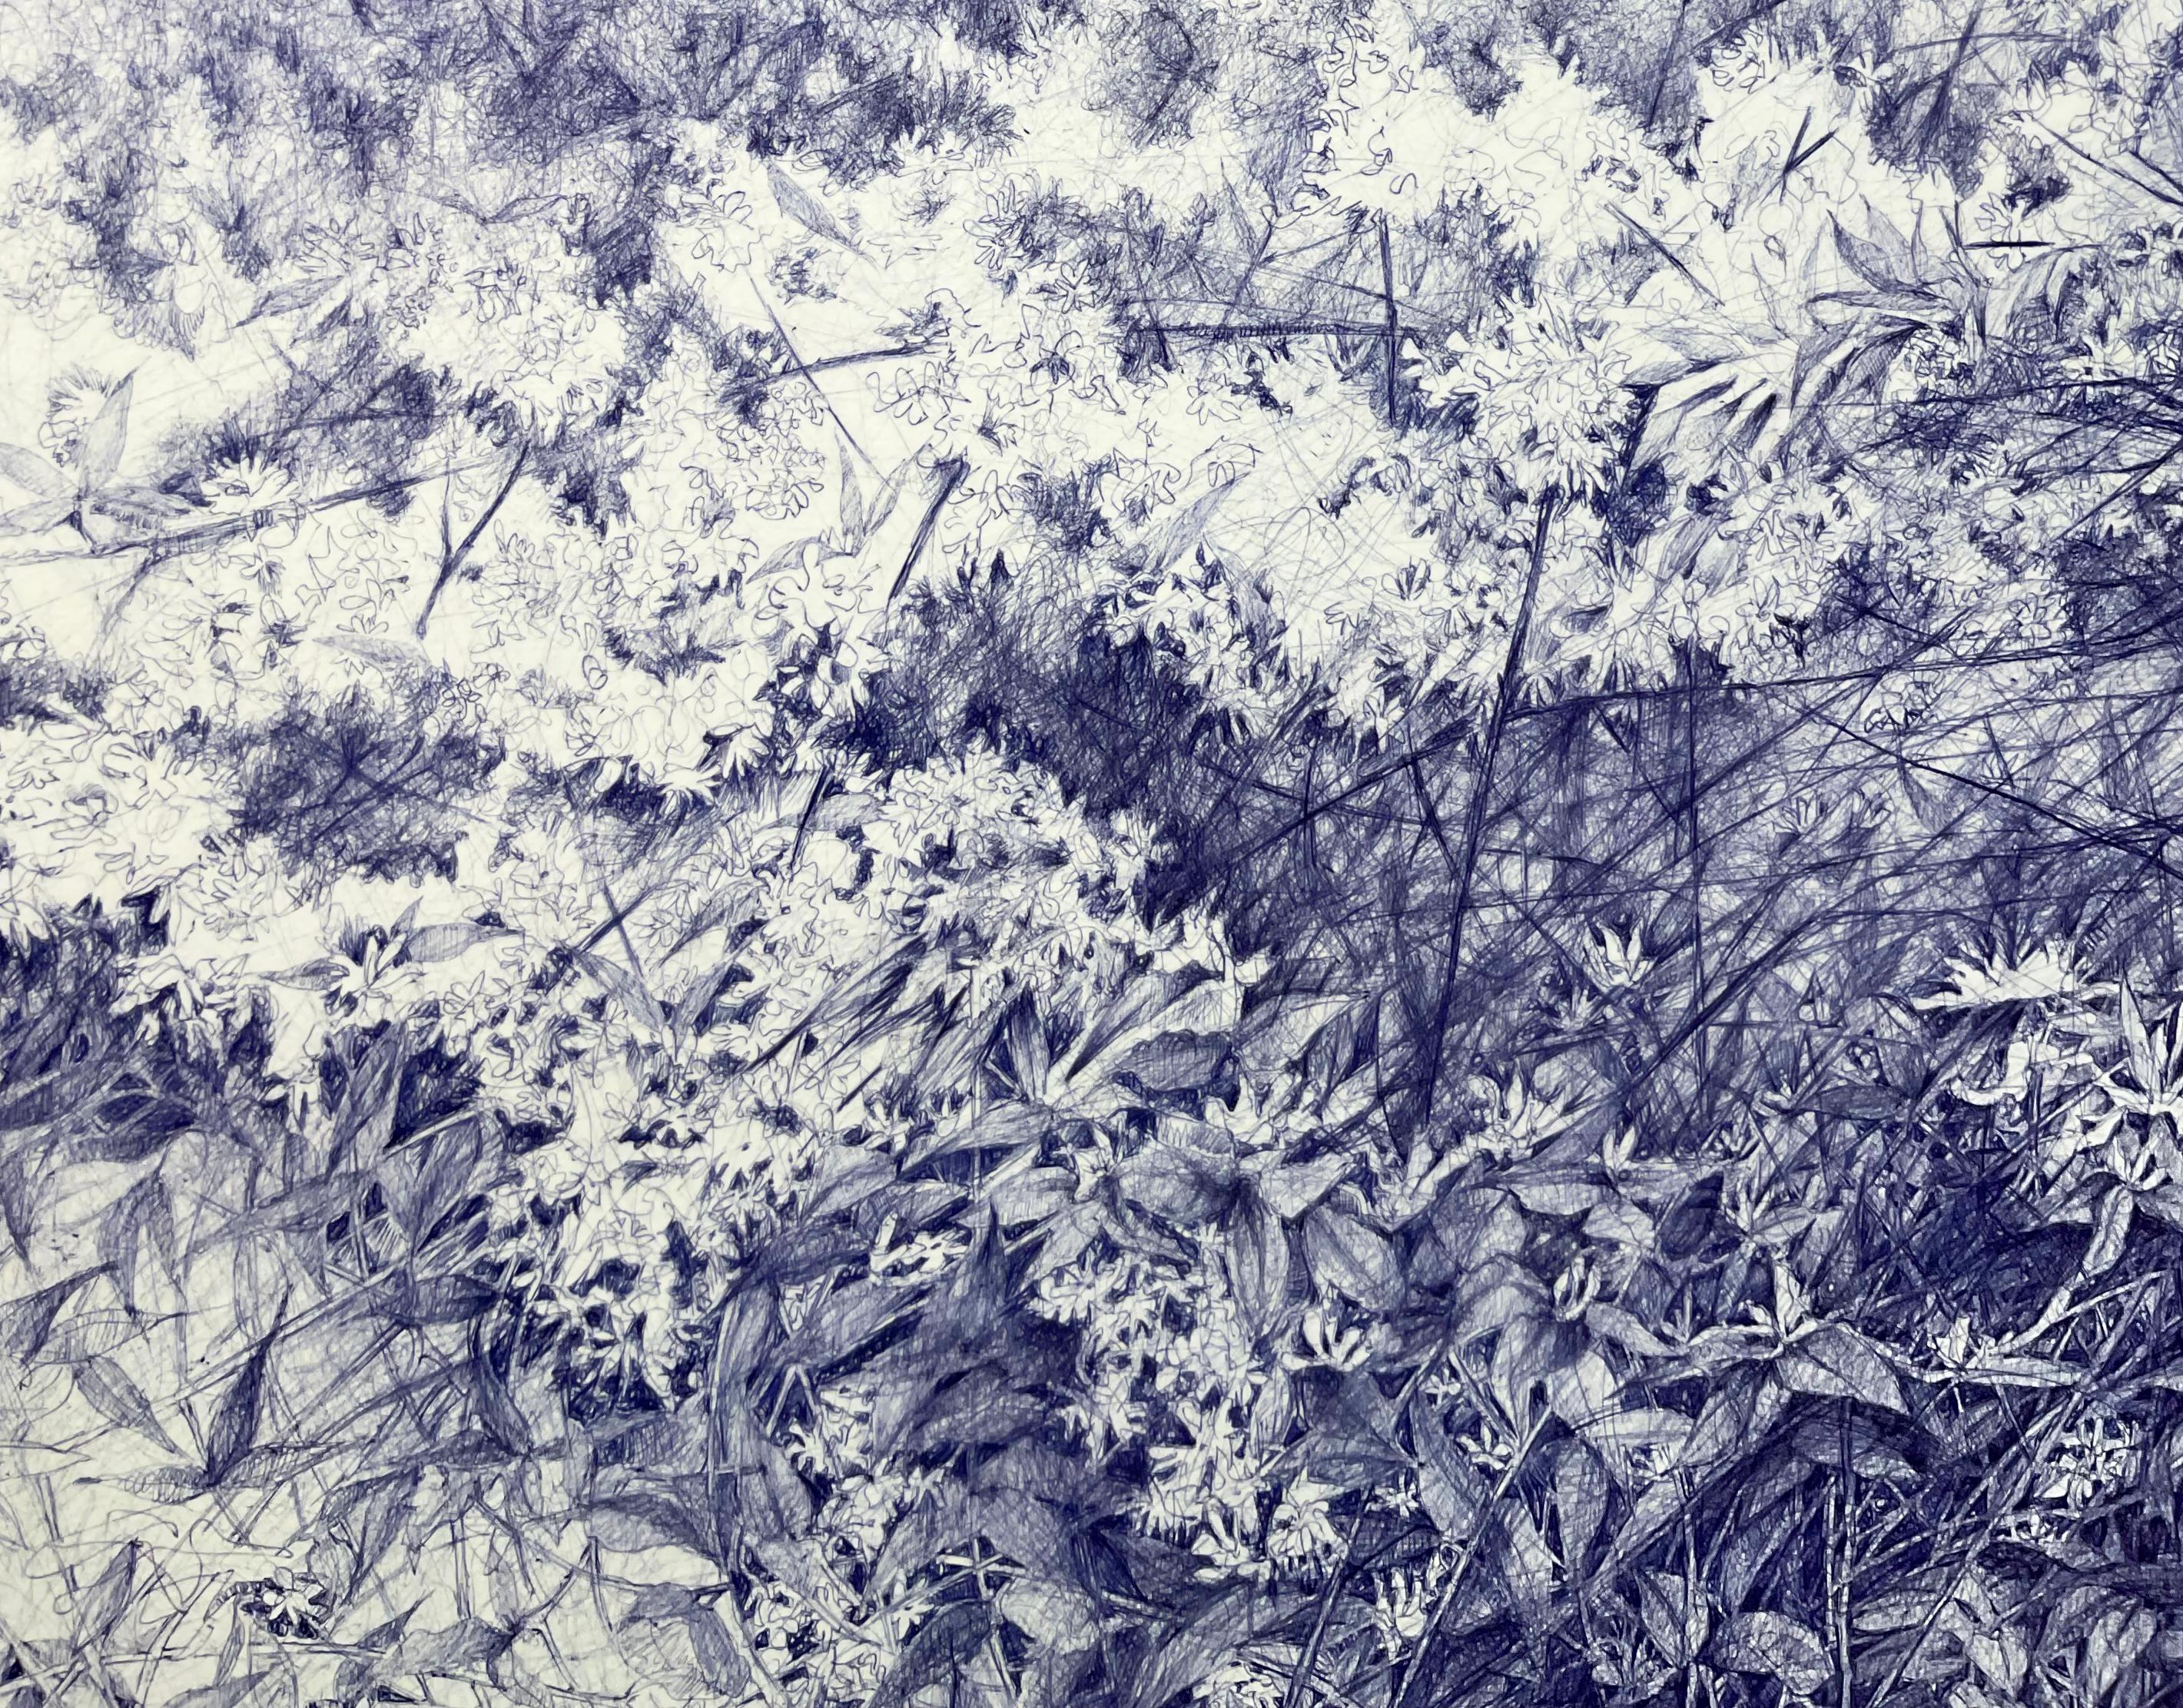 Archival inkjet print of a realistic lush country forest landscape drawing made with blue ball-point pen
